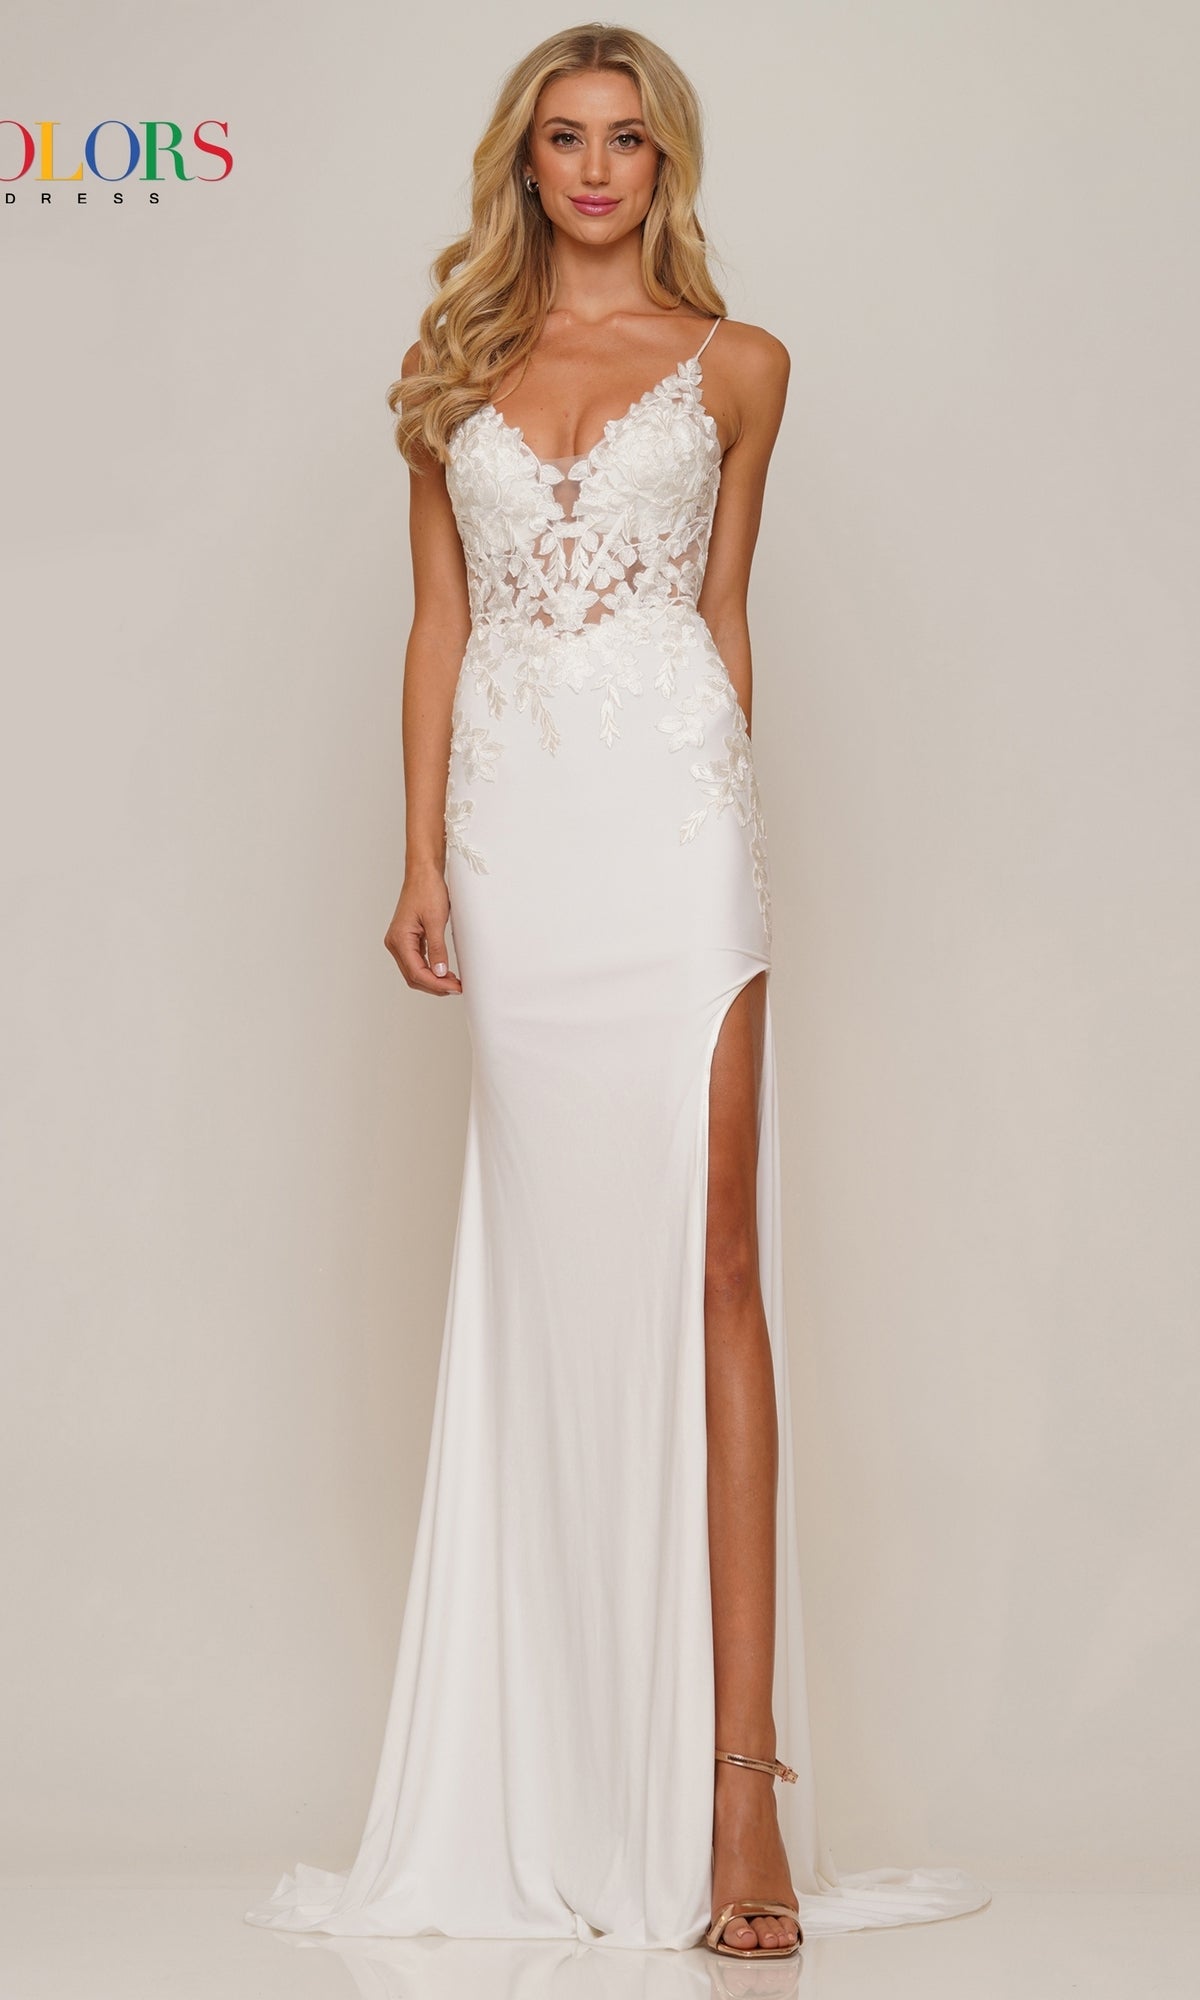 Long Prom Dress G1086 by Colors Dress